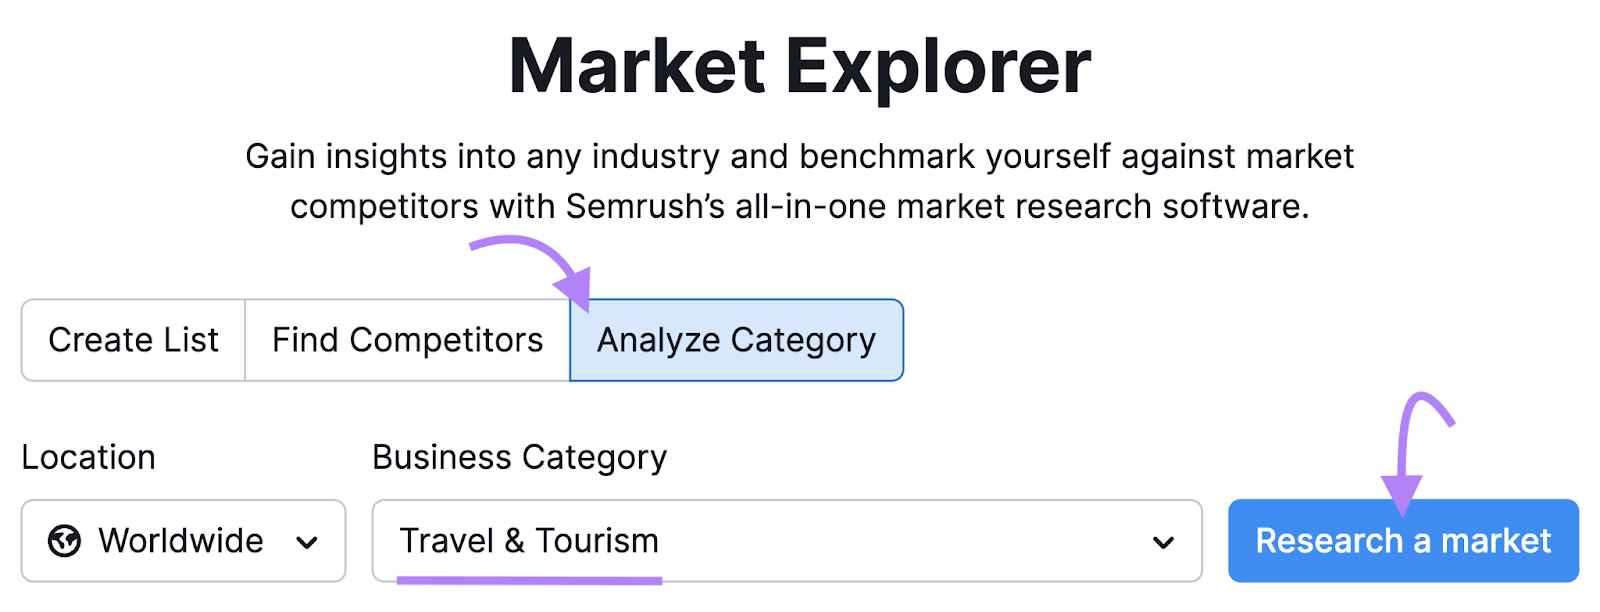 Analyzing "Travel & Tourism" Category in Market Explorer